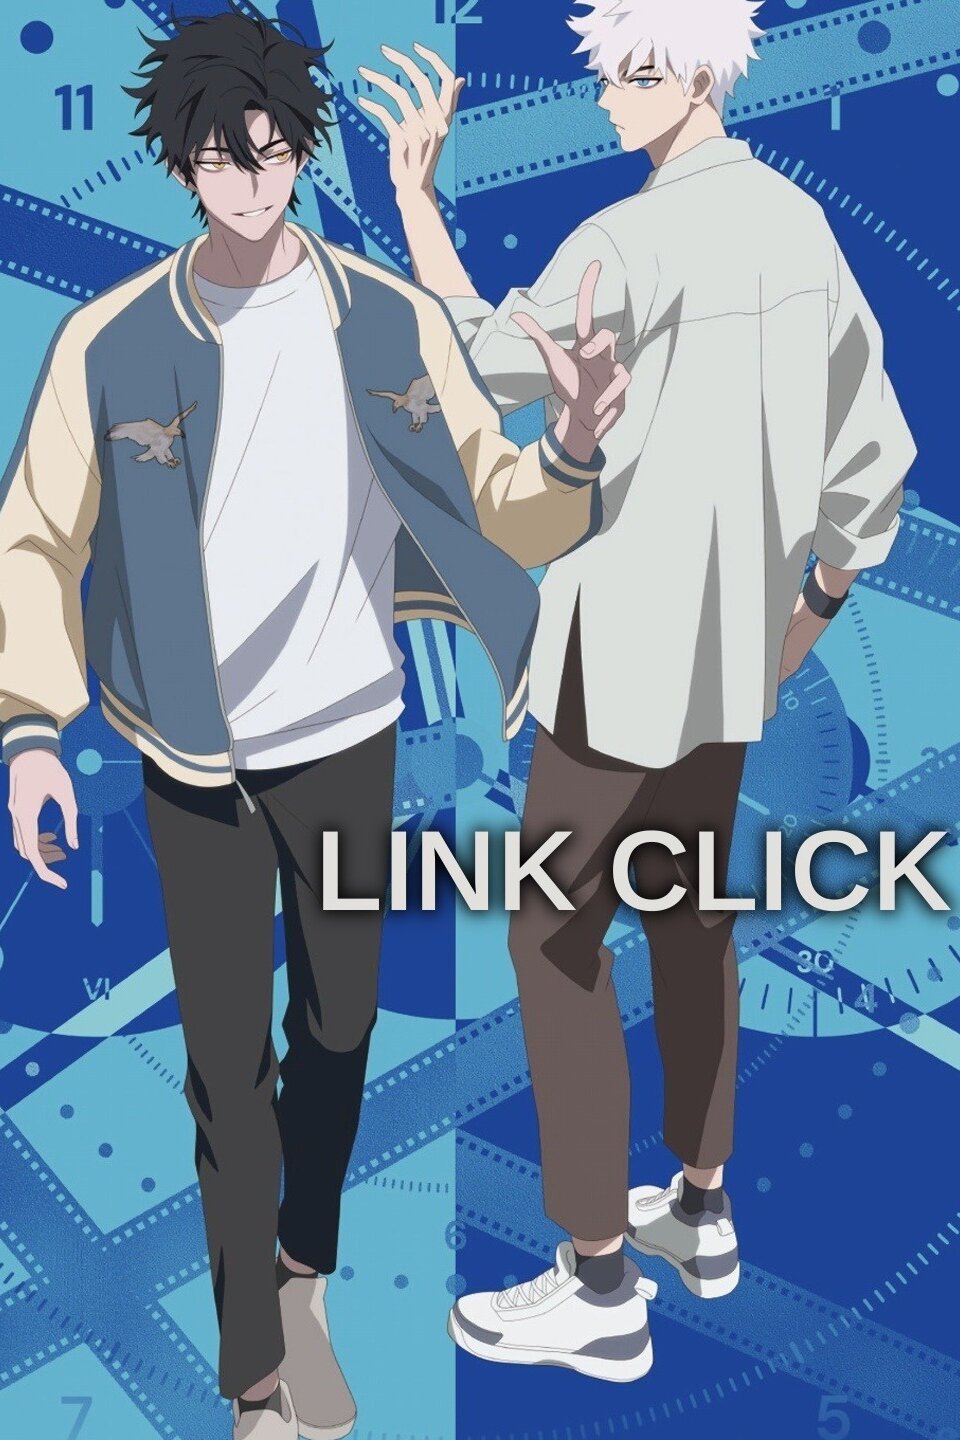 Link Click (Shiguang Dailiren) - Series Review - Lost in Anime